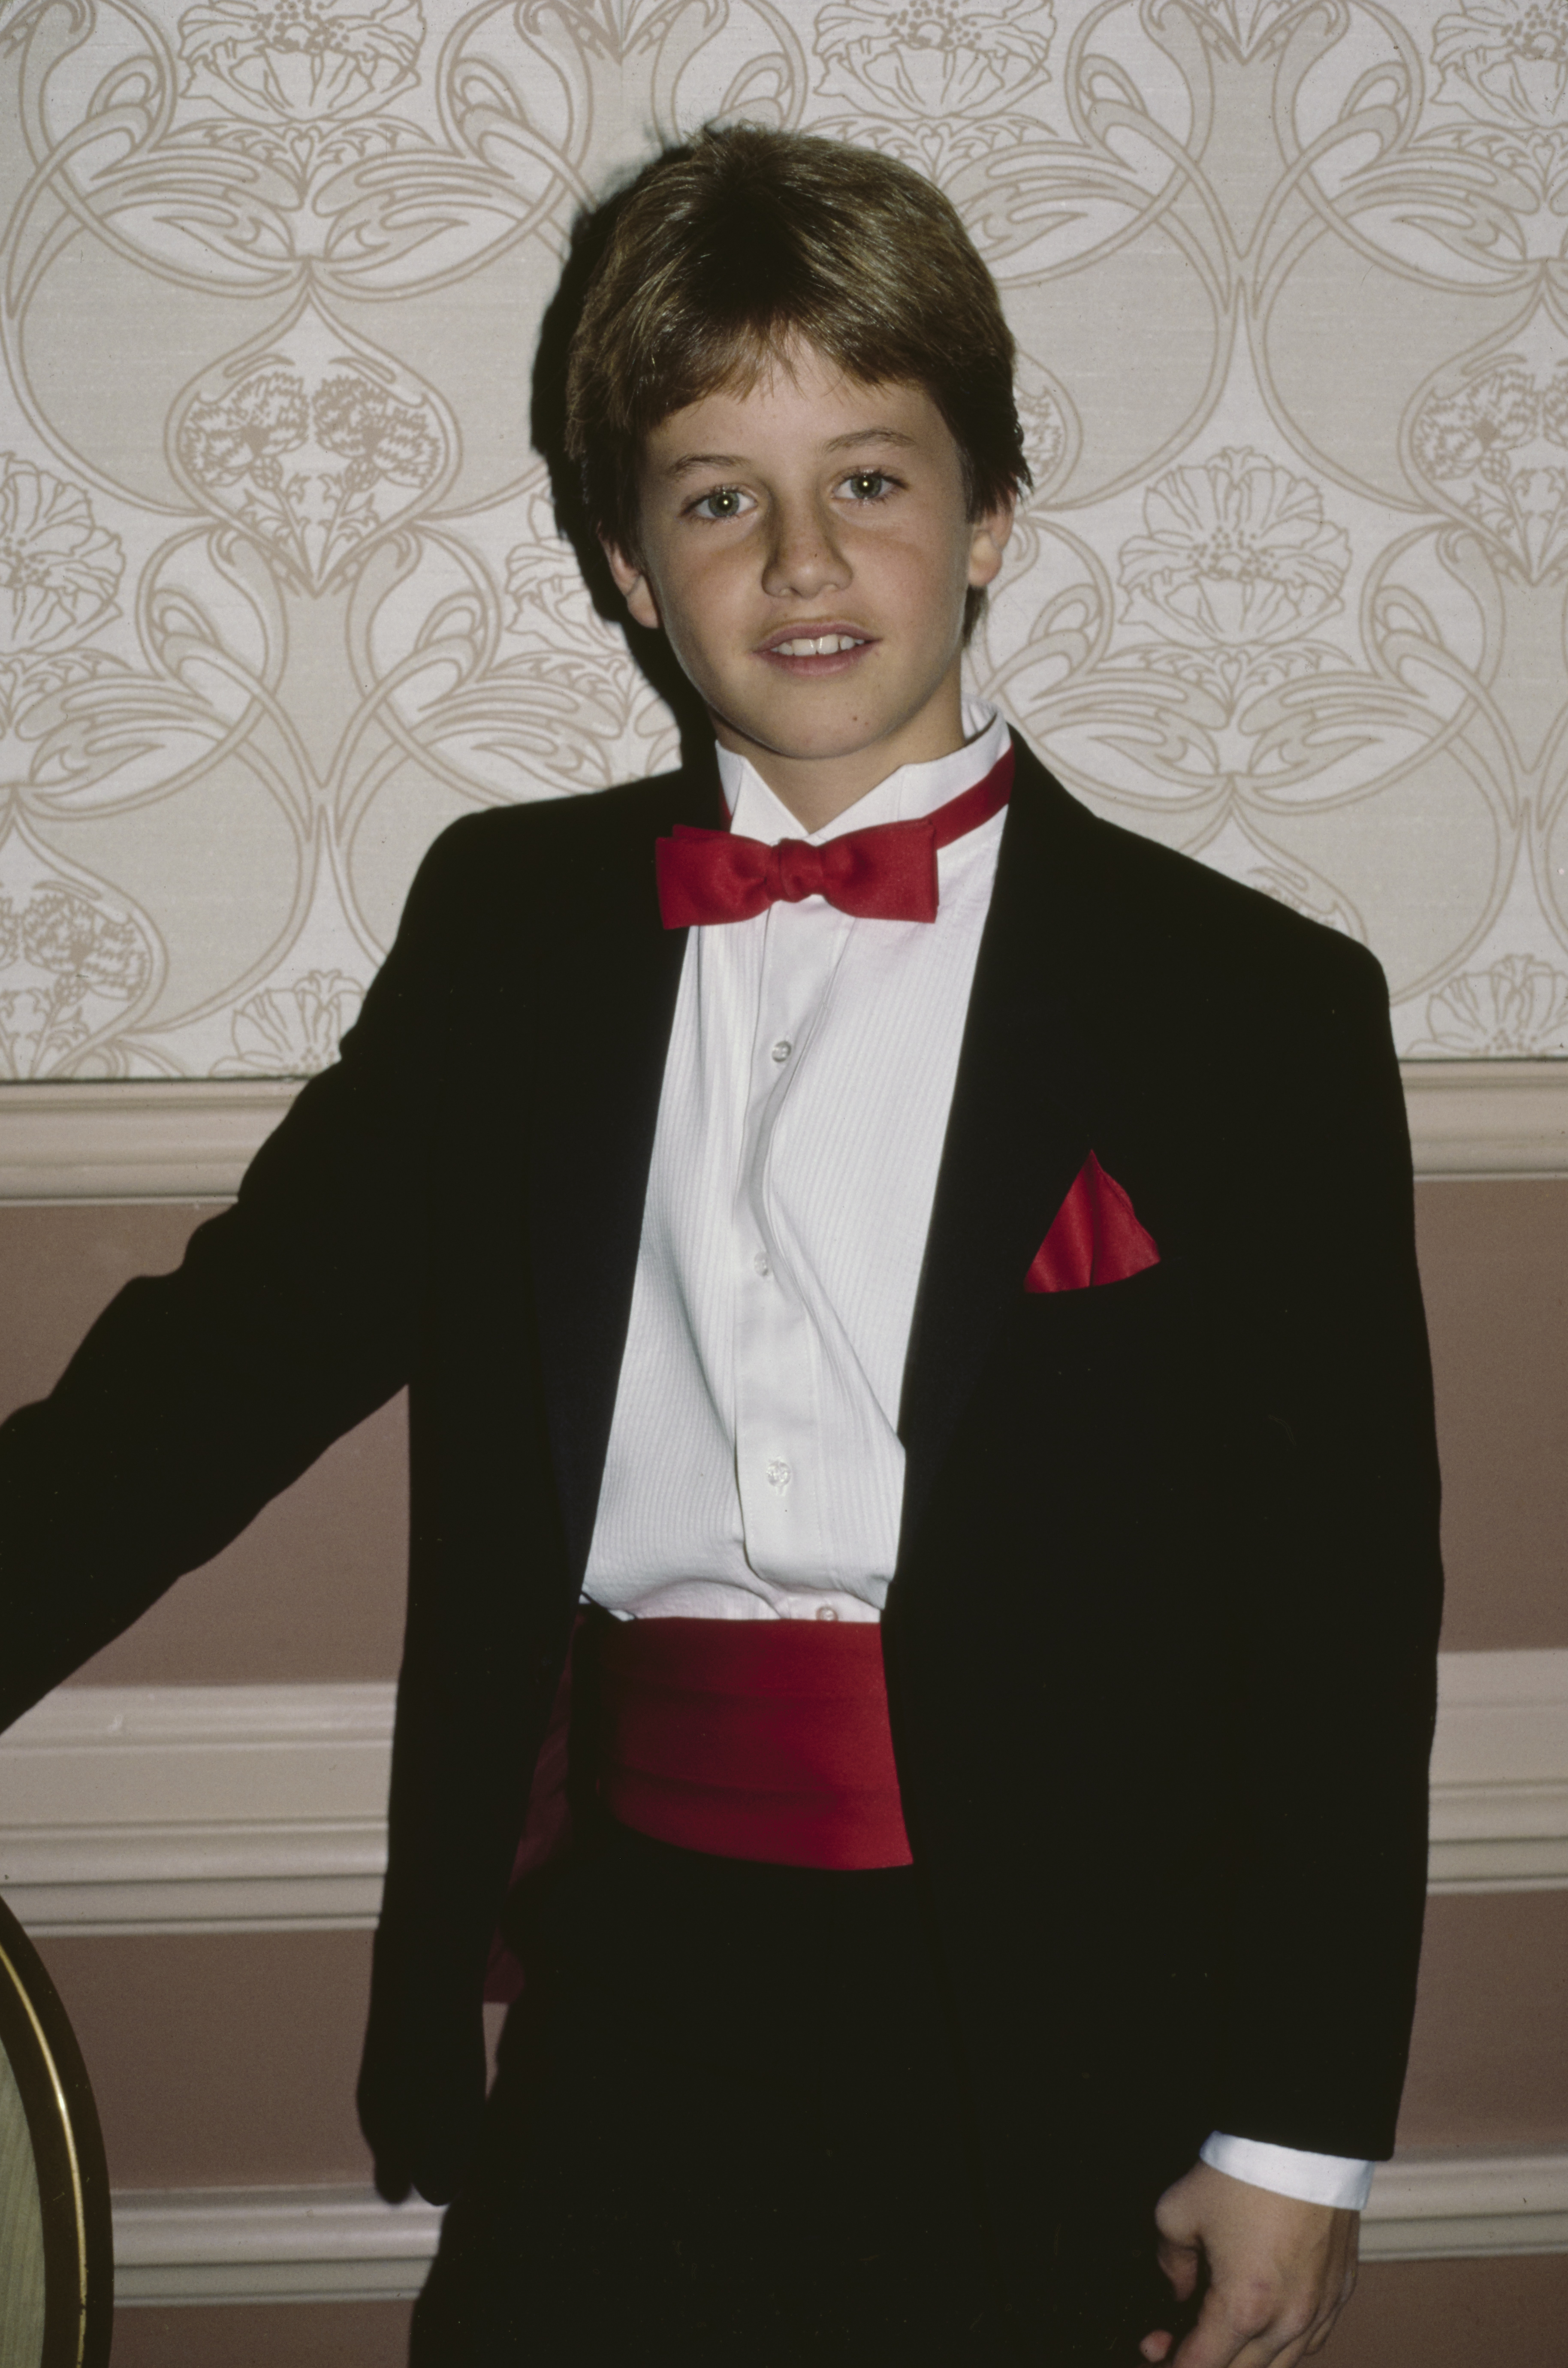 Kirk Cameron, circa 1982 | Source: Getty Images